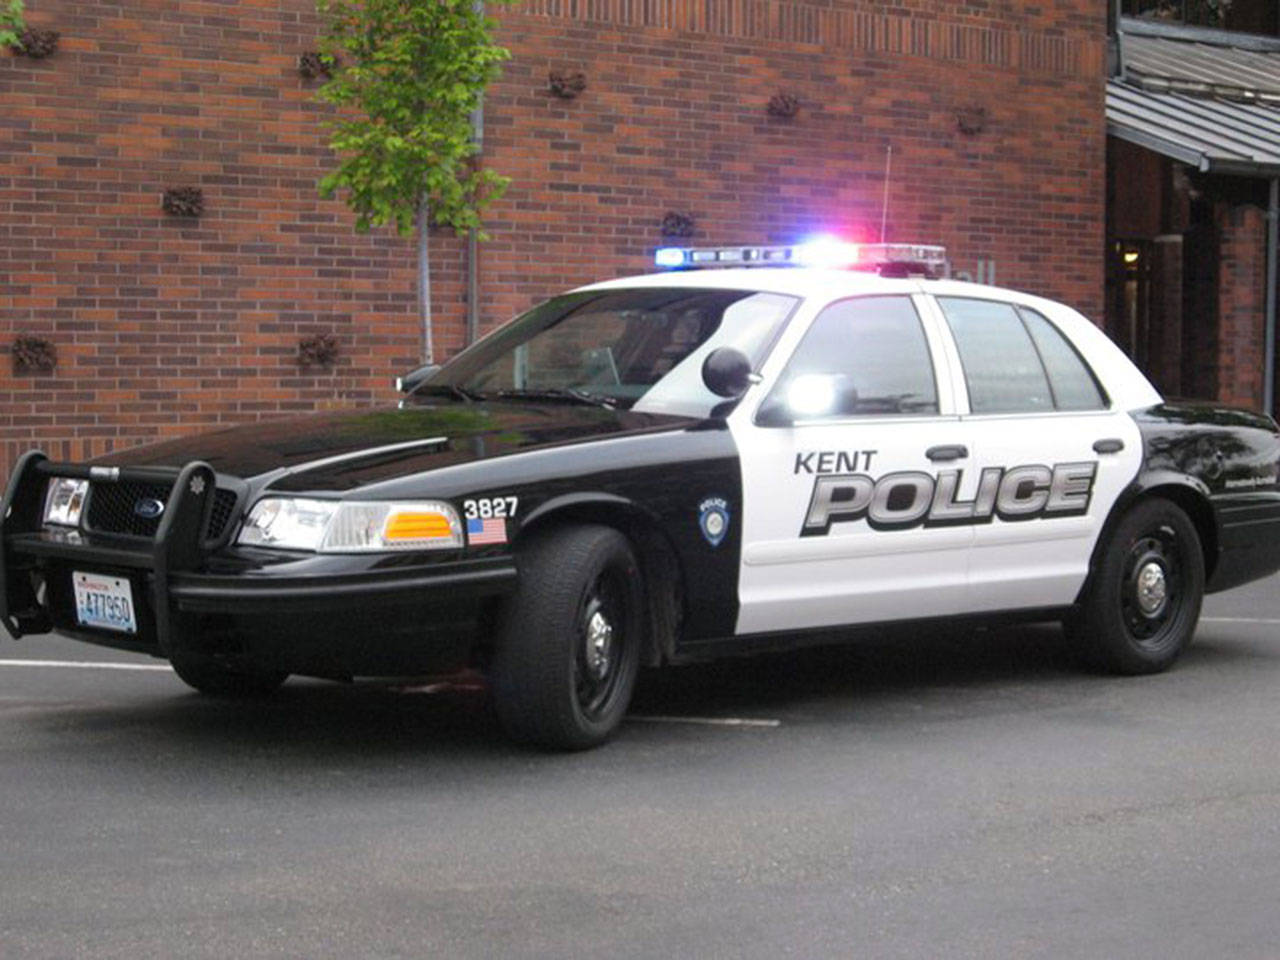 Kent officers chase down reckless driver | Police Blotter